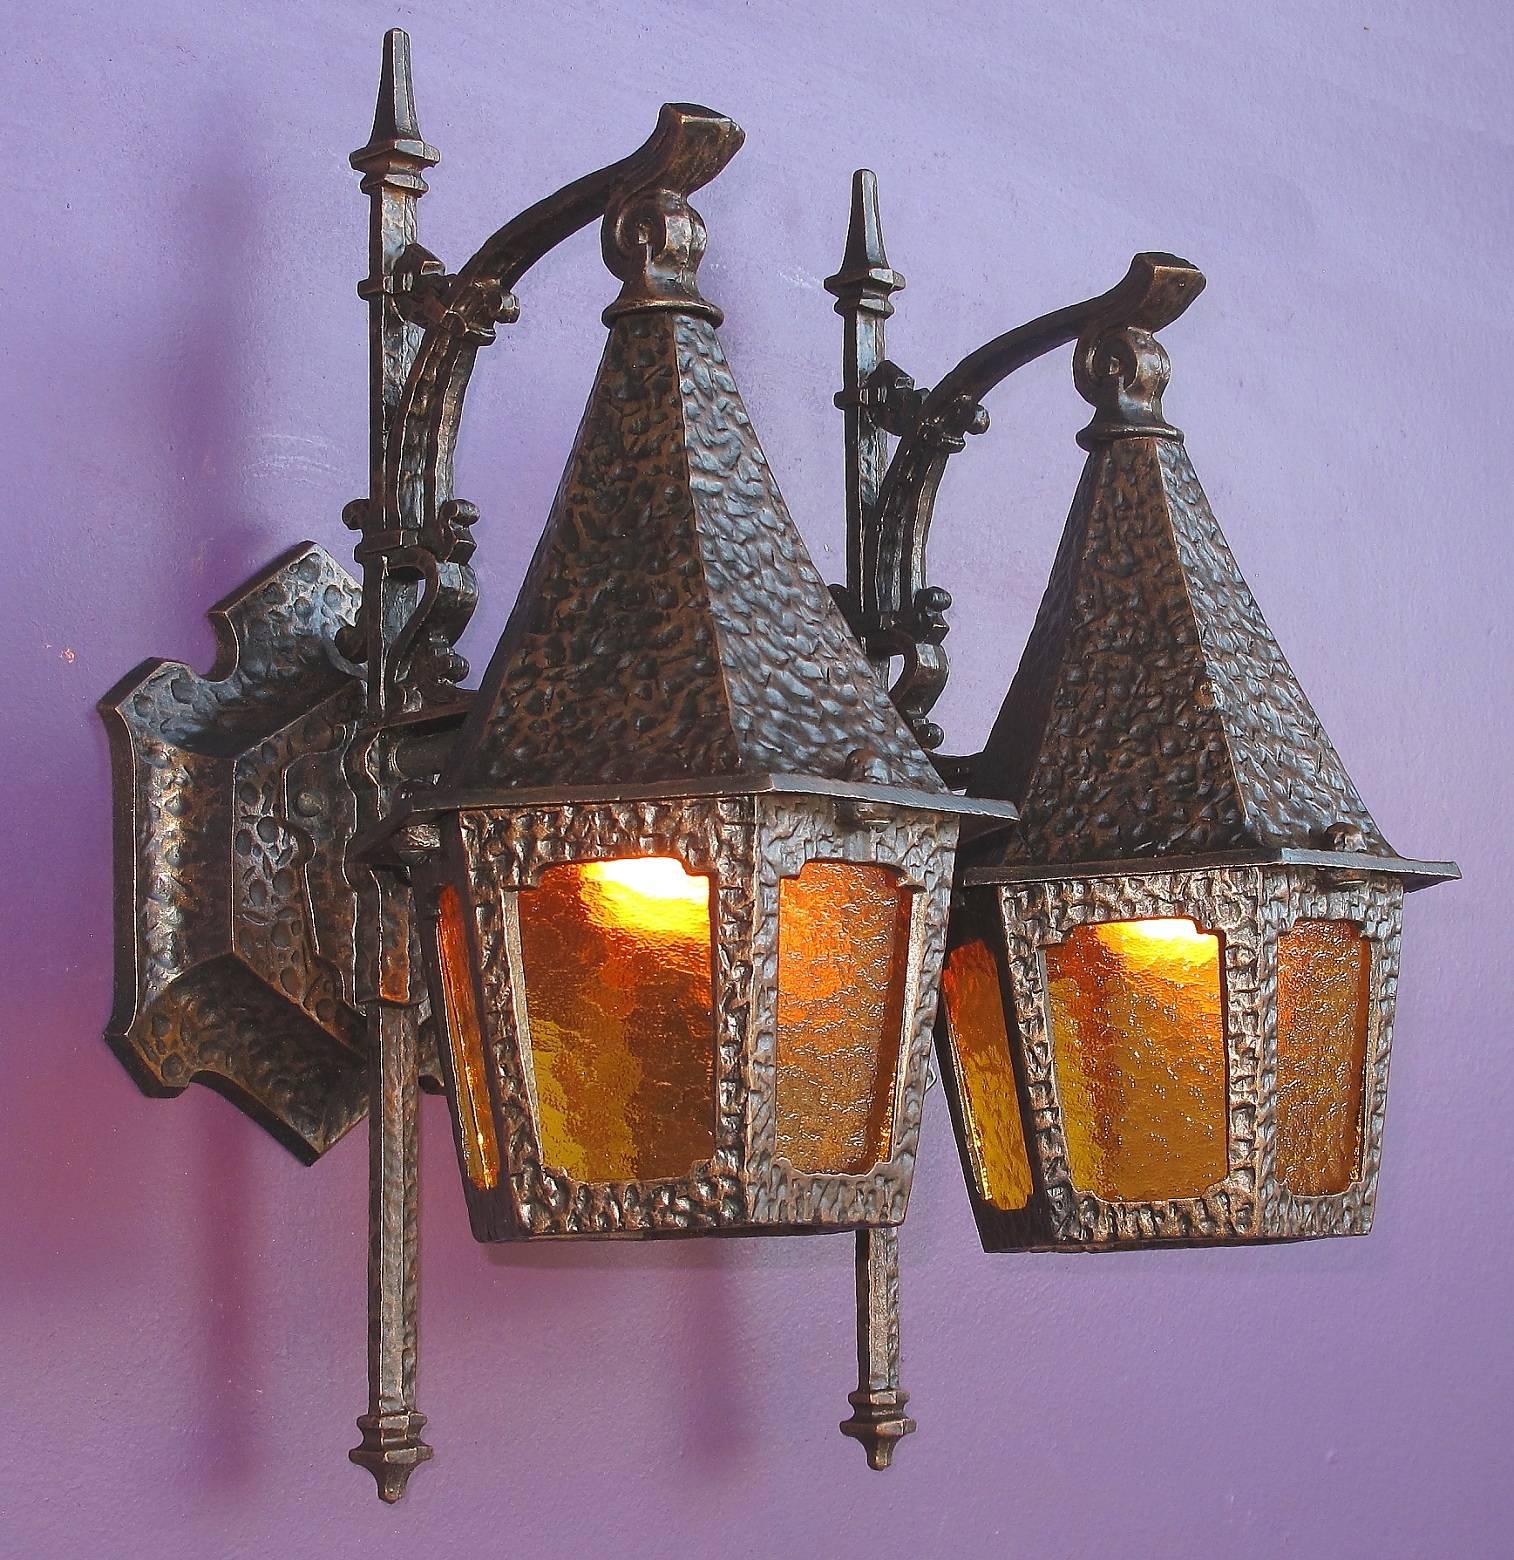 Painted Storybook Style Porch Lights, circa 1930